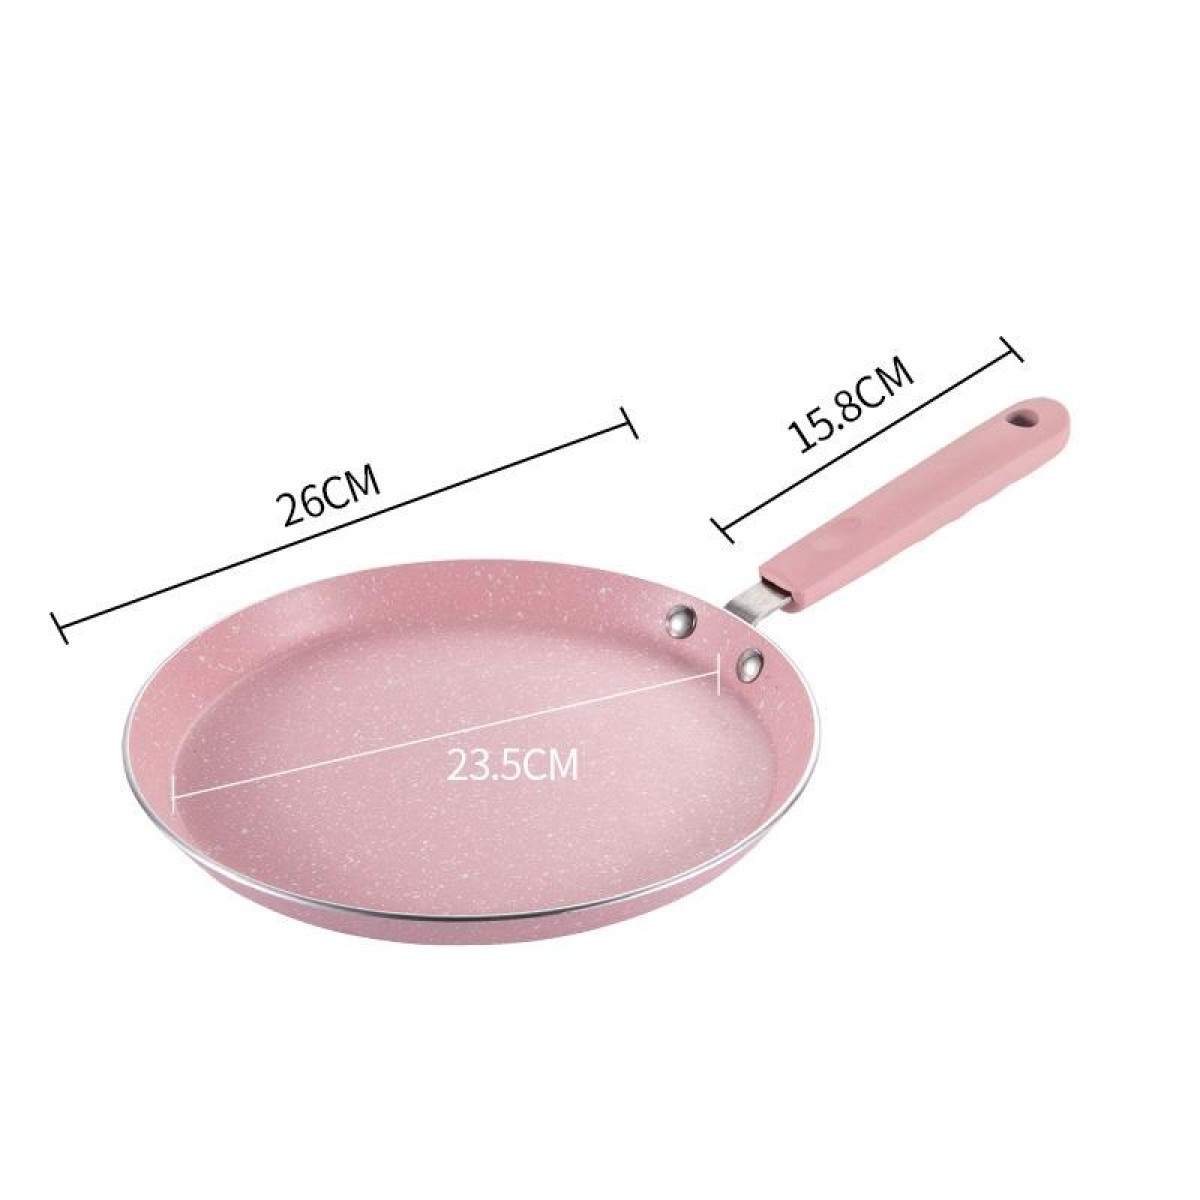 Non-Adhesive Pan Cake Crust Omelette Breakfast Pancake Pan, Colour: Pink 10 inch